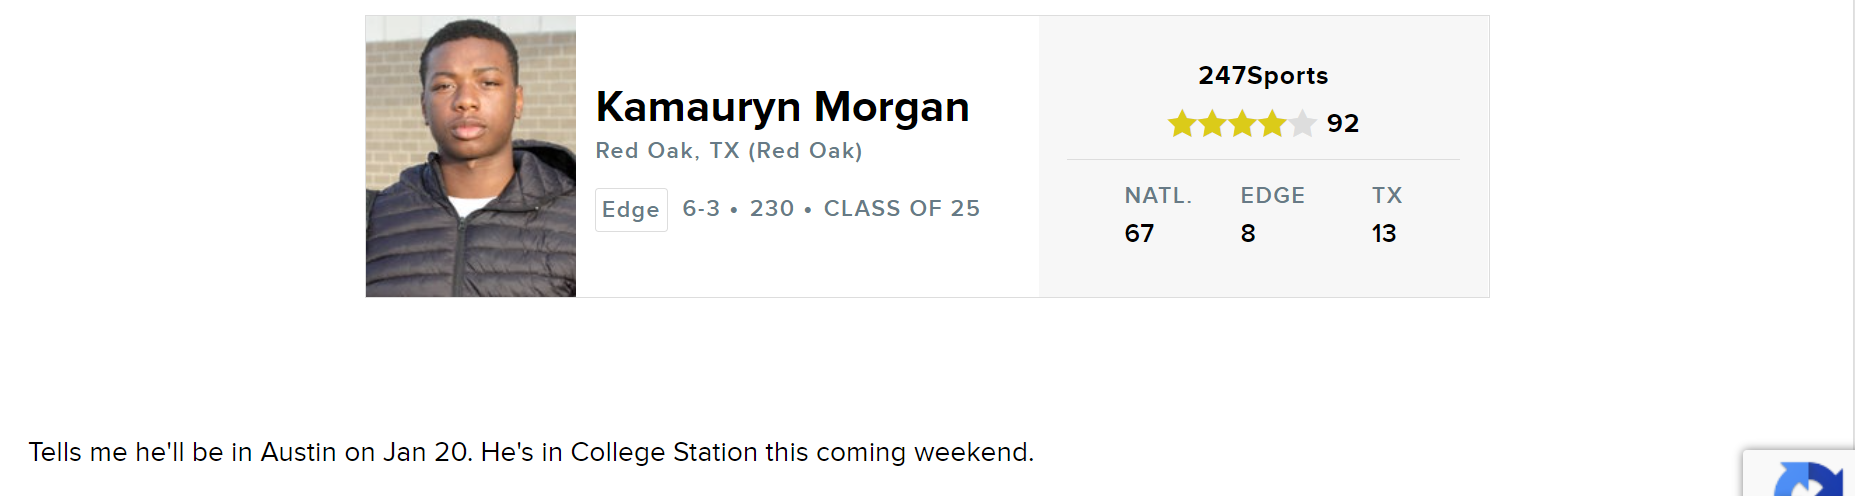 Texas Recruiting Notes Now We Have A Machine Gun Page